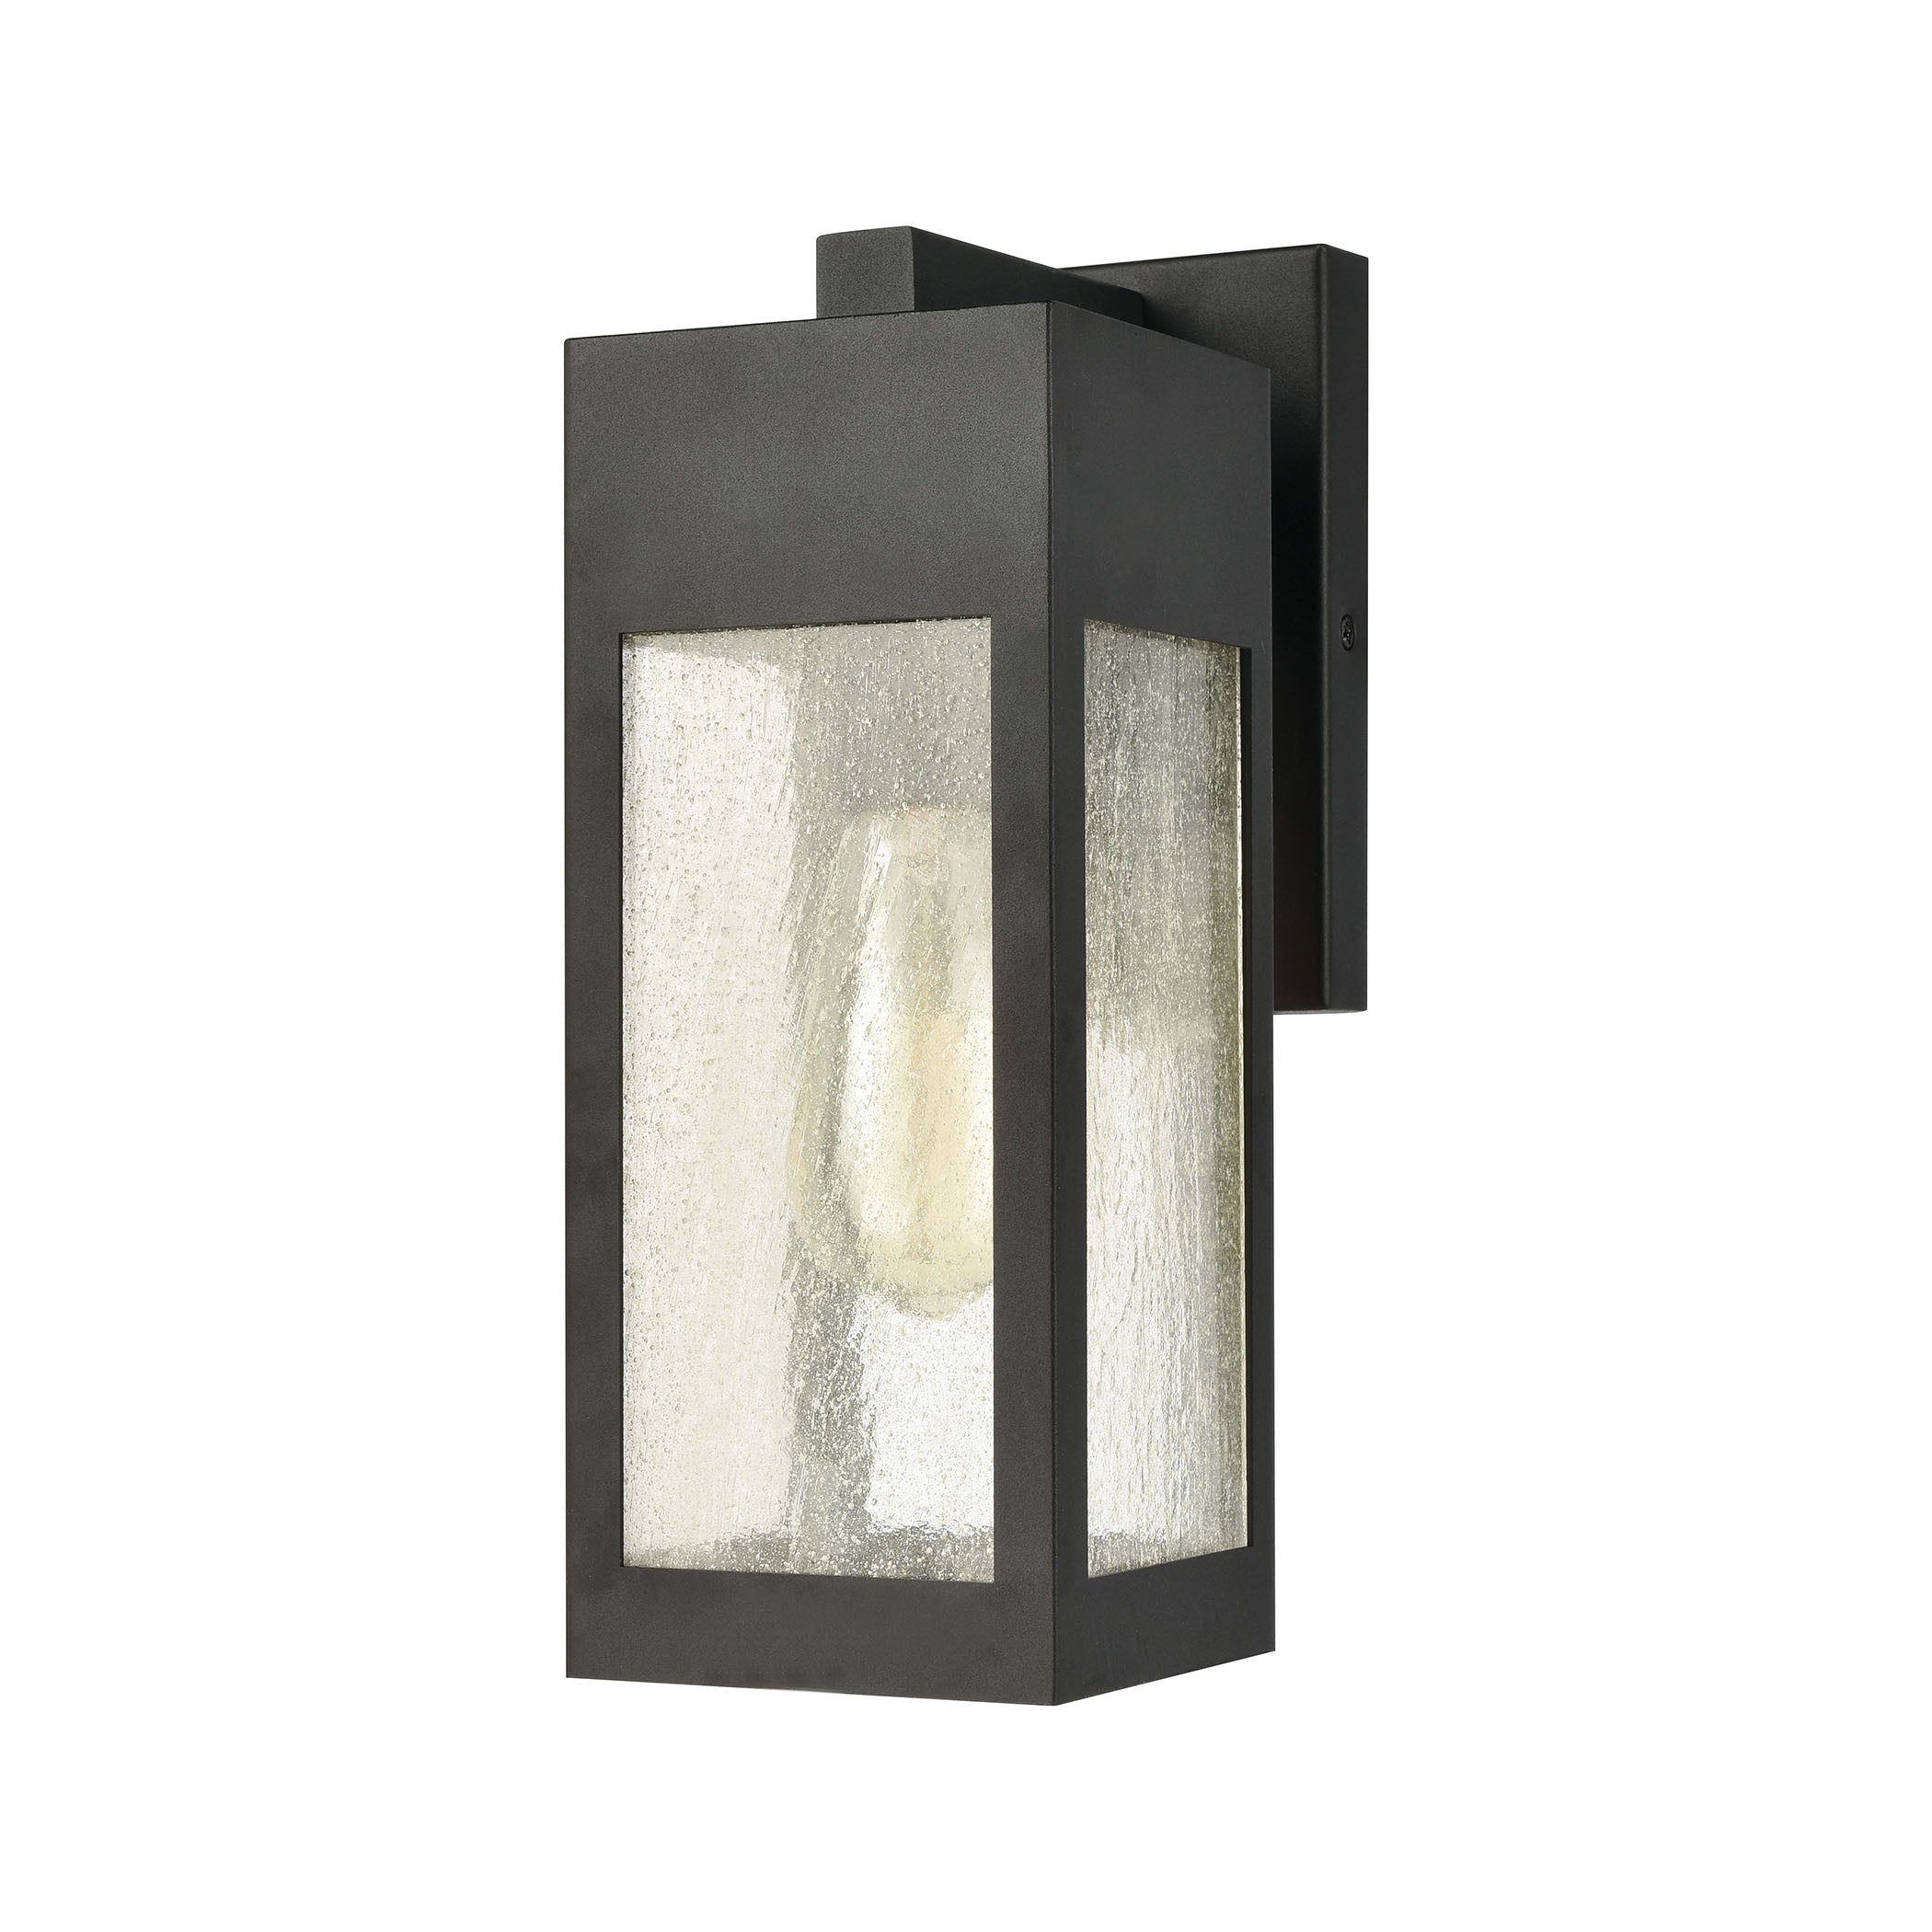 ELK Lighting 57300/1 Angus 1-Light Outdoor Sconce in Charcoal with Seedy Glass Enclosure